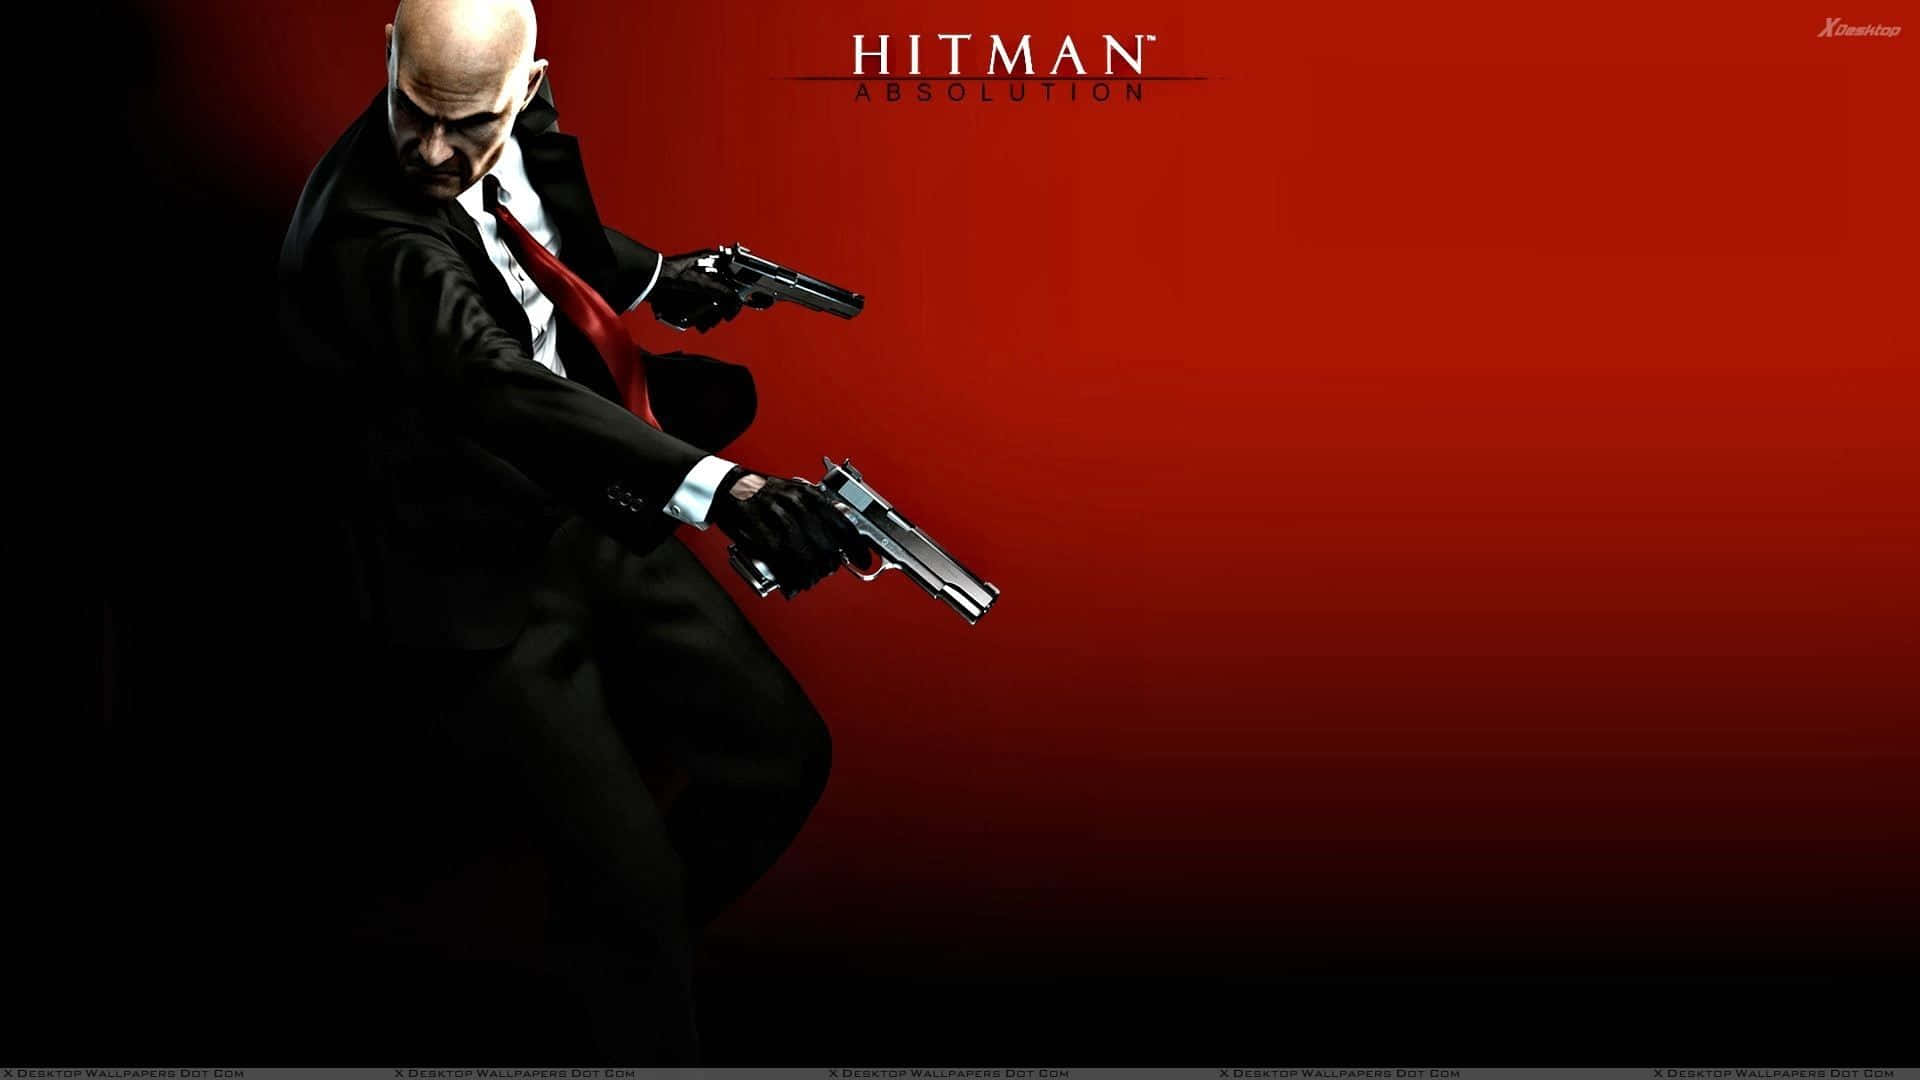 Step into the shoes of a hitman as you embark on revenge-filled missions